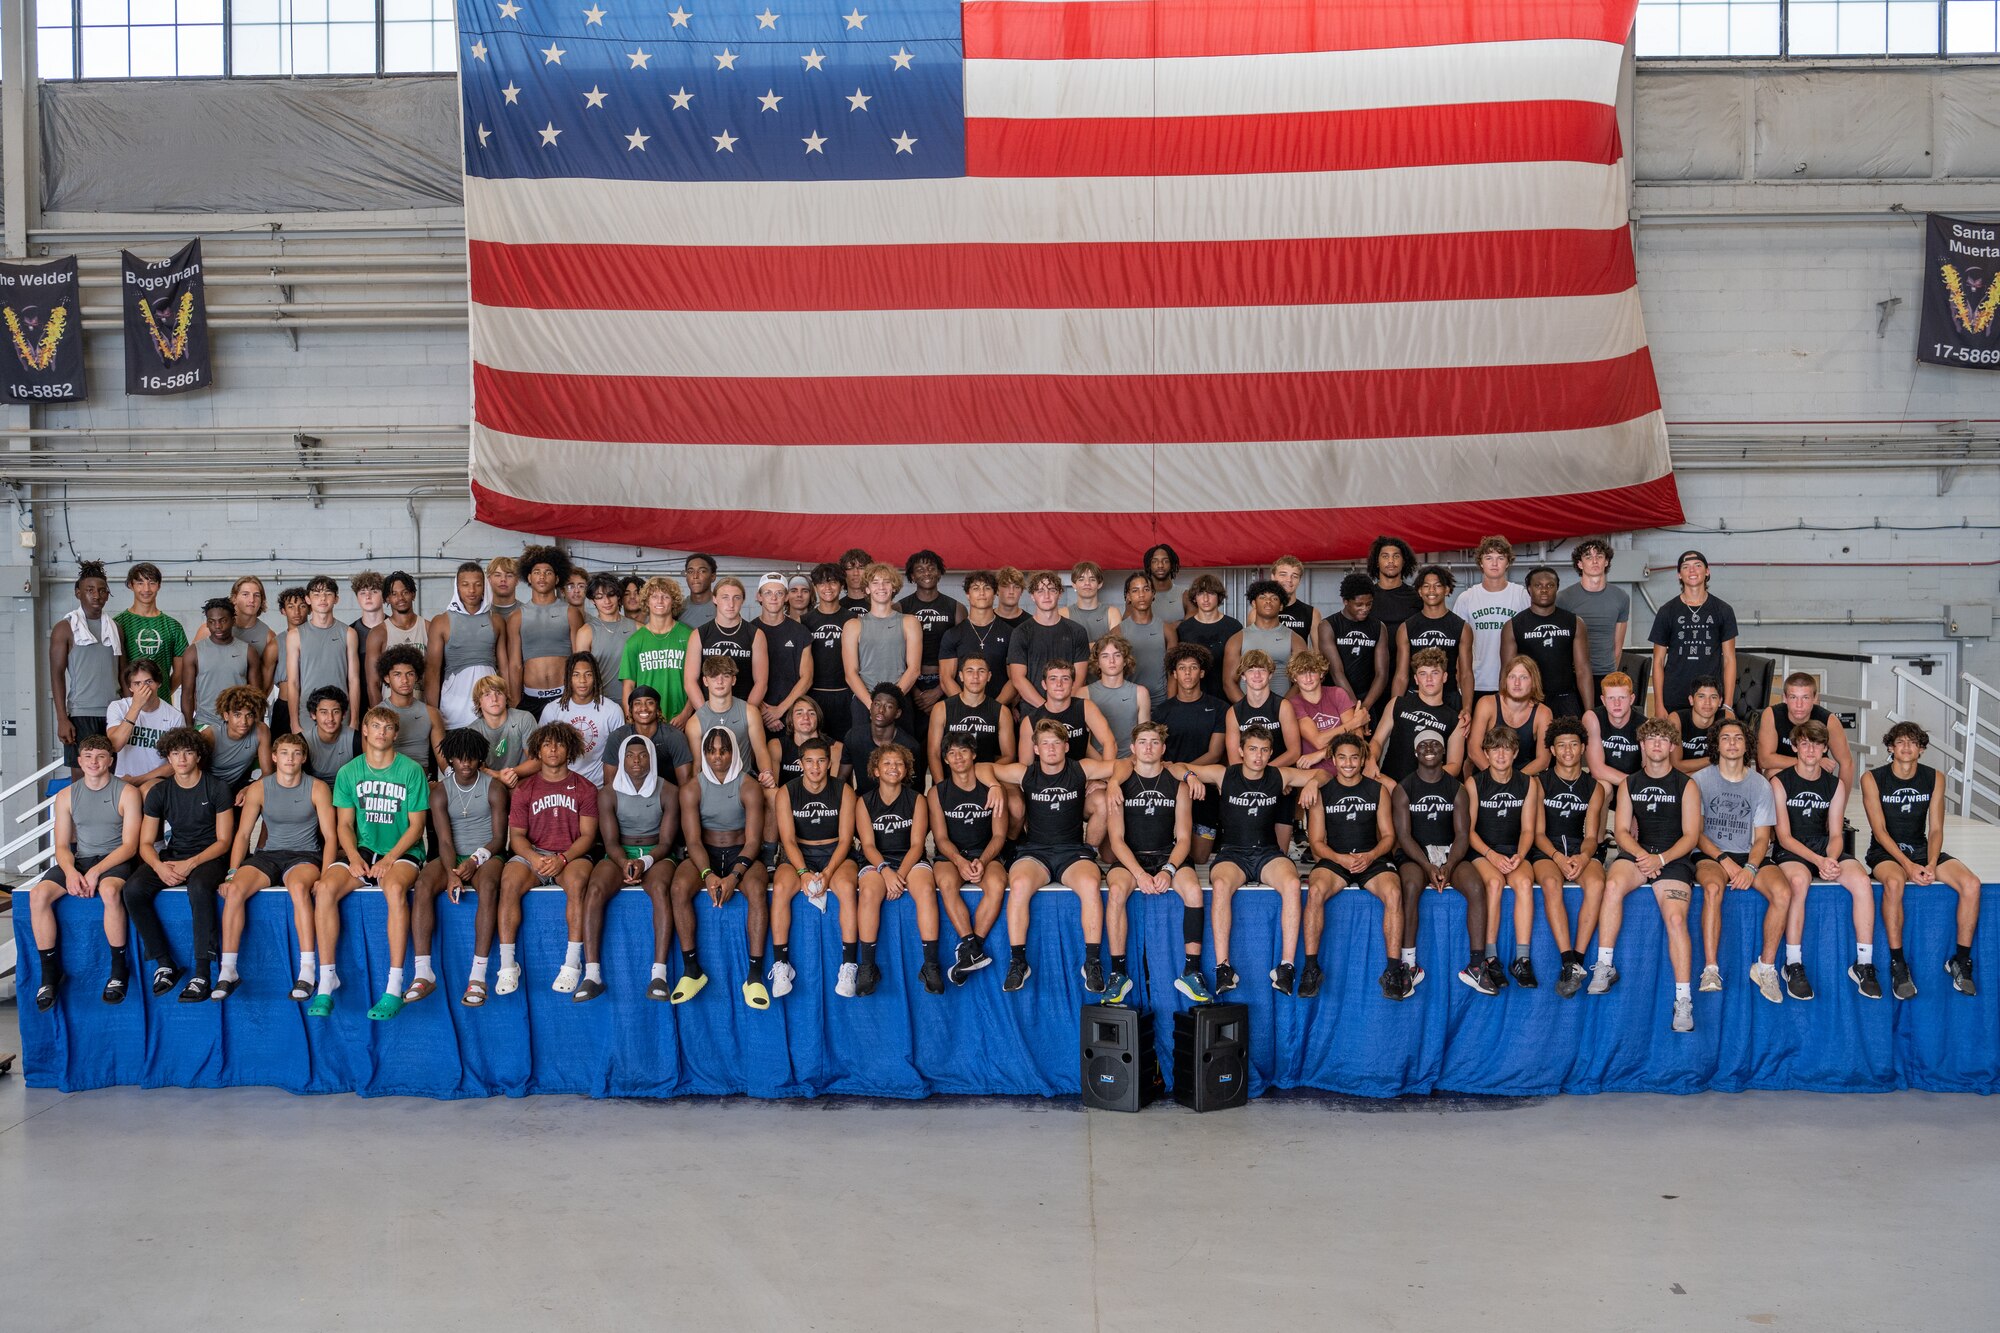 Students from Navarre High school and Choctawhatchee High School pose for a group photo at the Commando Hanger at Hurlburt Field, Florida, July 13, 2023.  Over 100 football players and coaches from Navarre High School and Choctawhatchee High School visited Hurlburt Field to learn more about Air Force Special Operations Command. (U.S. Air Force photo by Airman 1st Class Alysa Calvarese)